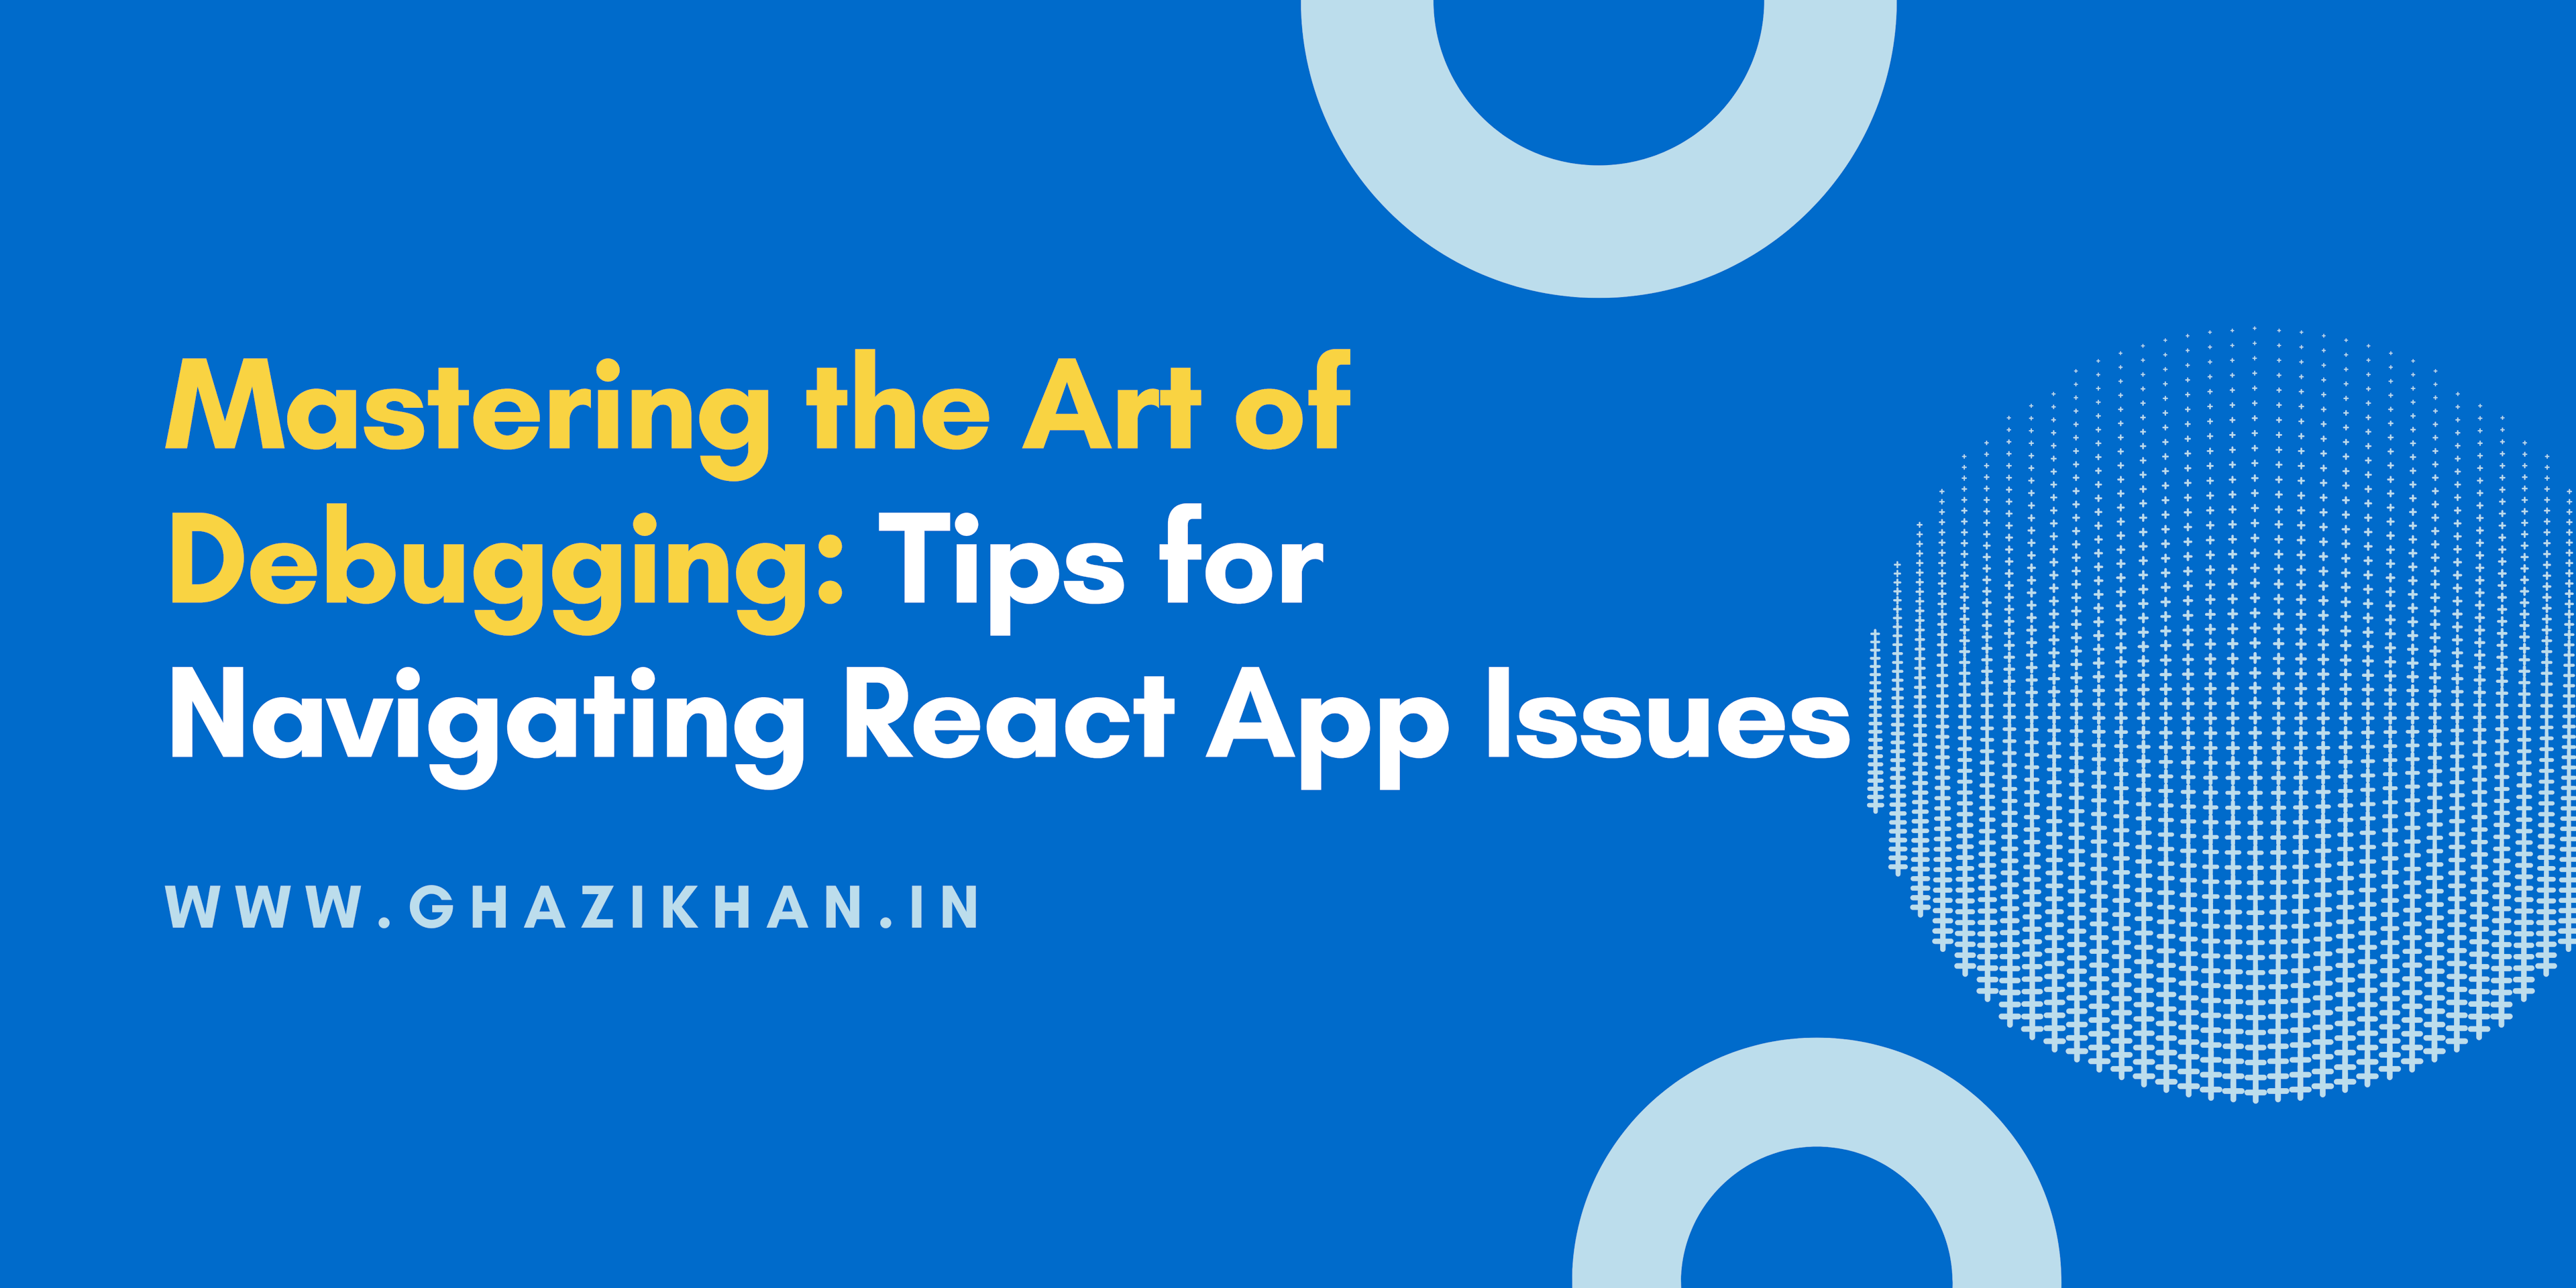 Mastering the Art of Debugging: Tips for Navigating React App Issues